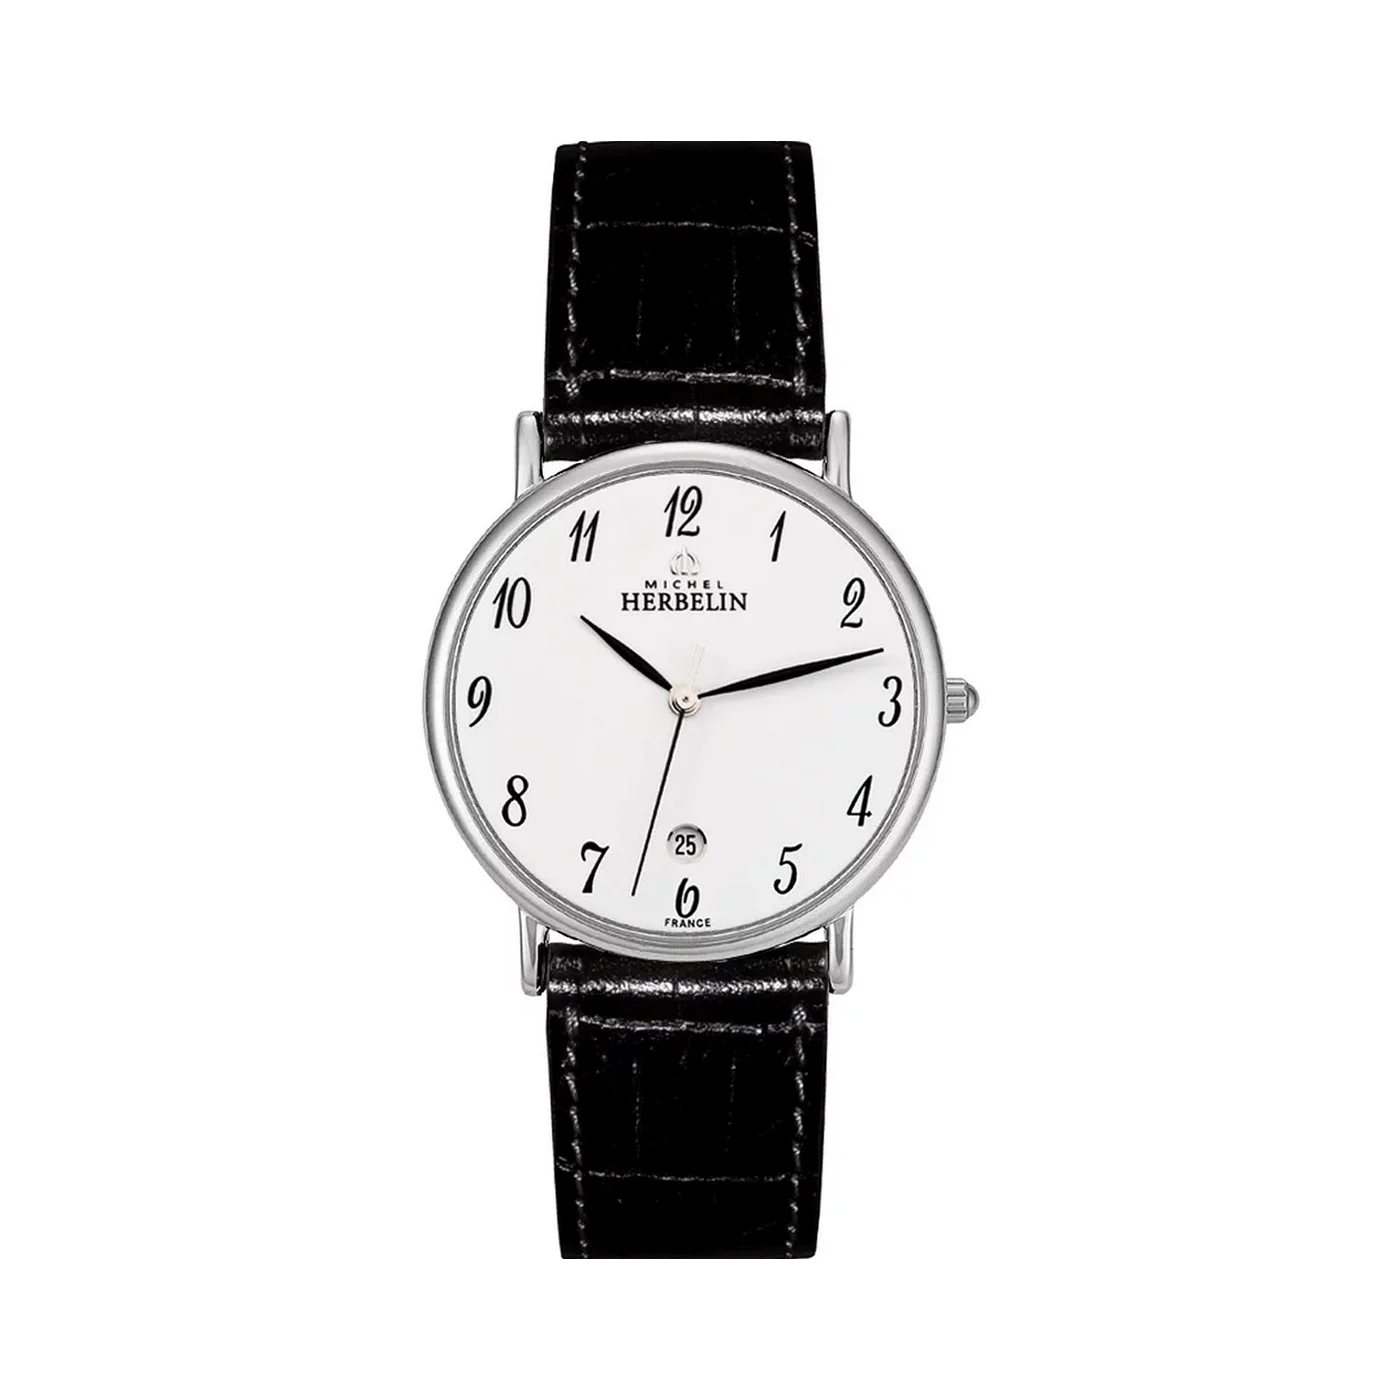 Michel Herbelin Classique Watch with Black Leather Strap